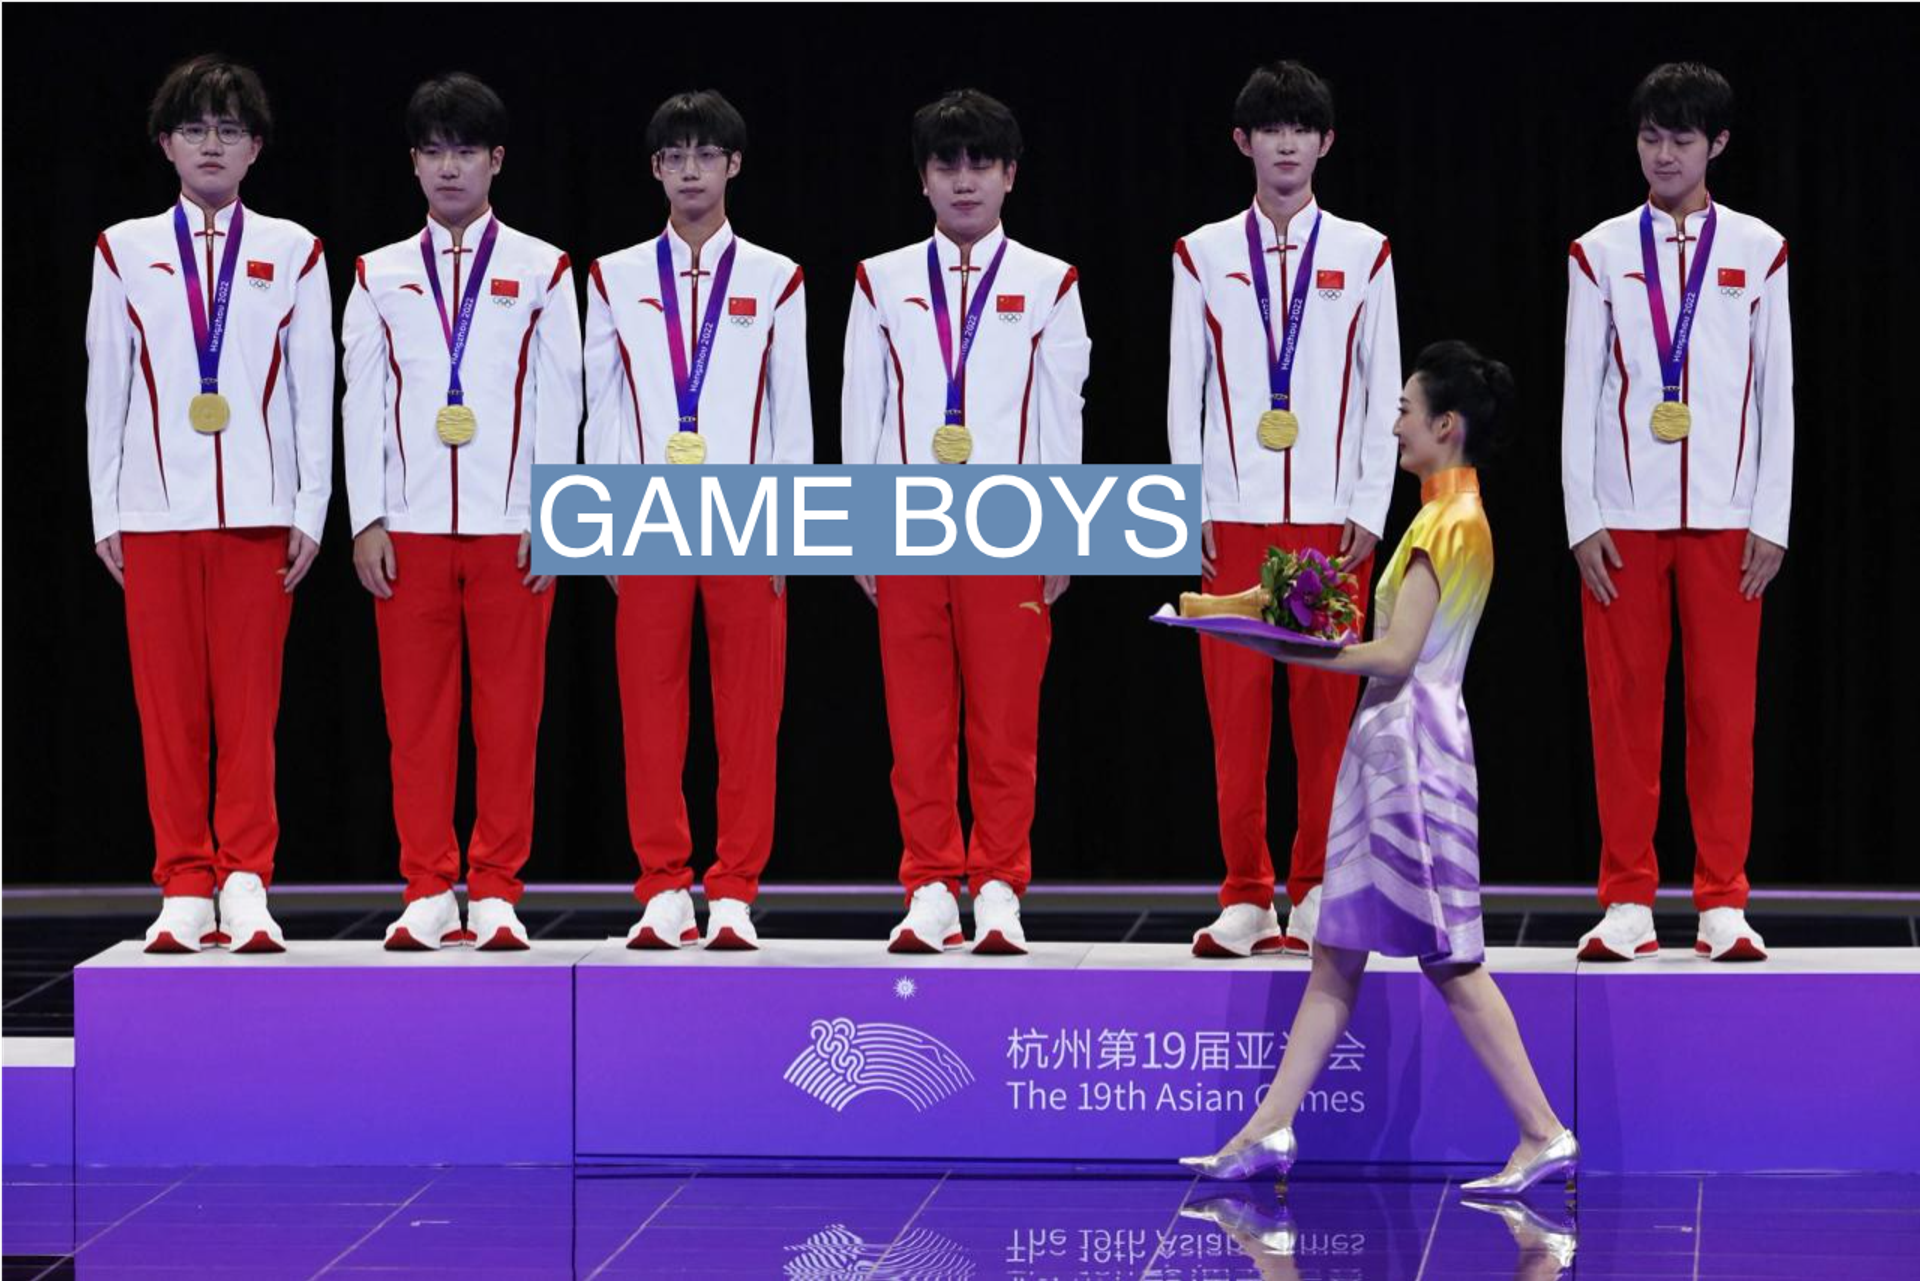 Team China with gold medals after winning the Arena of Valor game in the esposts event at the Asian Games